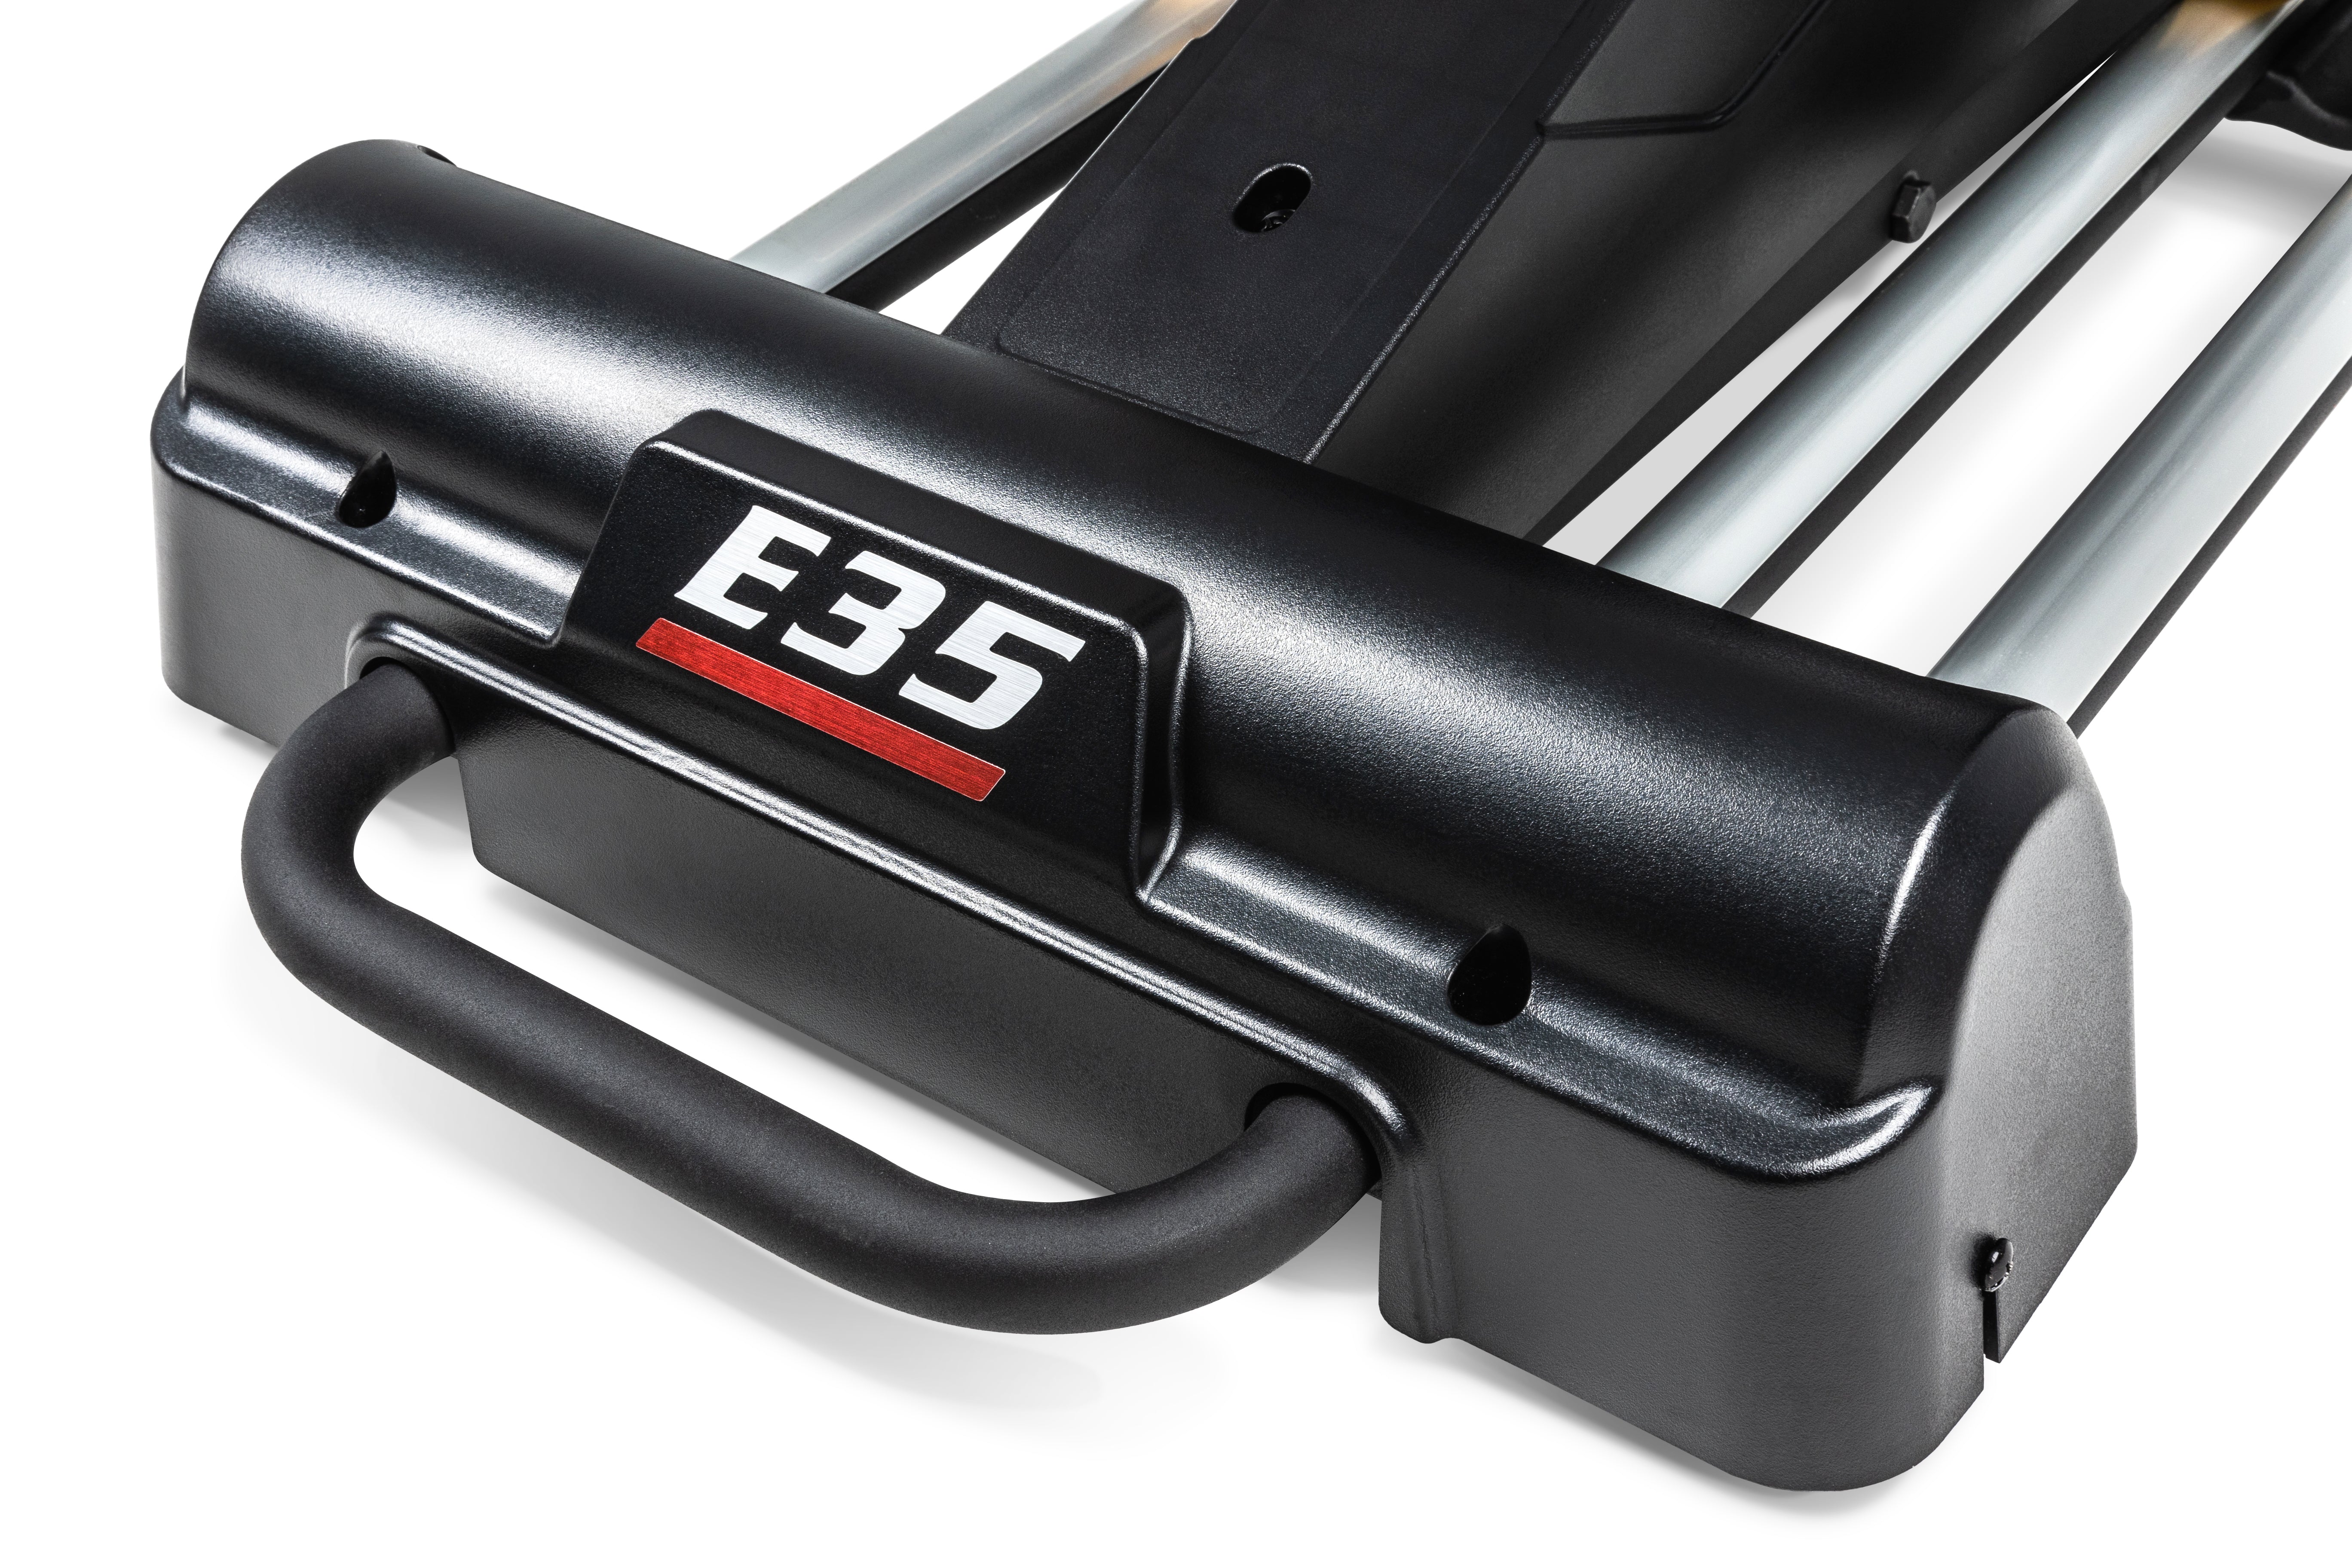 Close-up of the Sole E35 elliptical trainer's base, showing the "E35" logo, a handle, and part of its rail system.